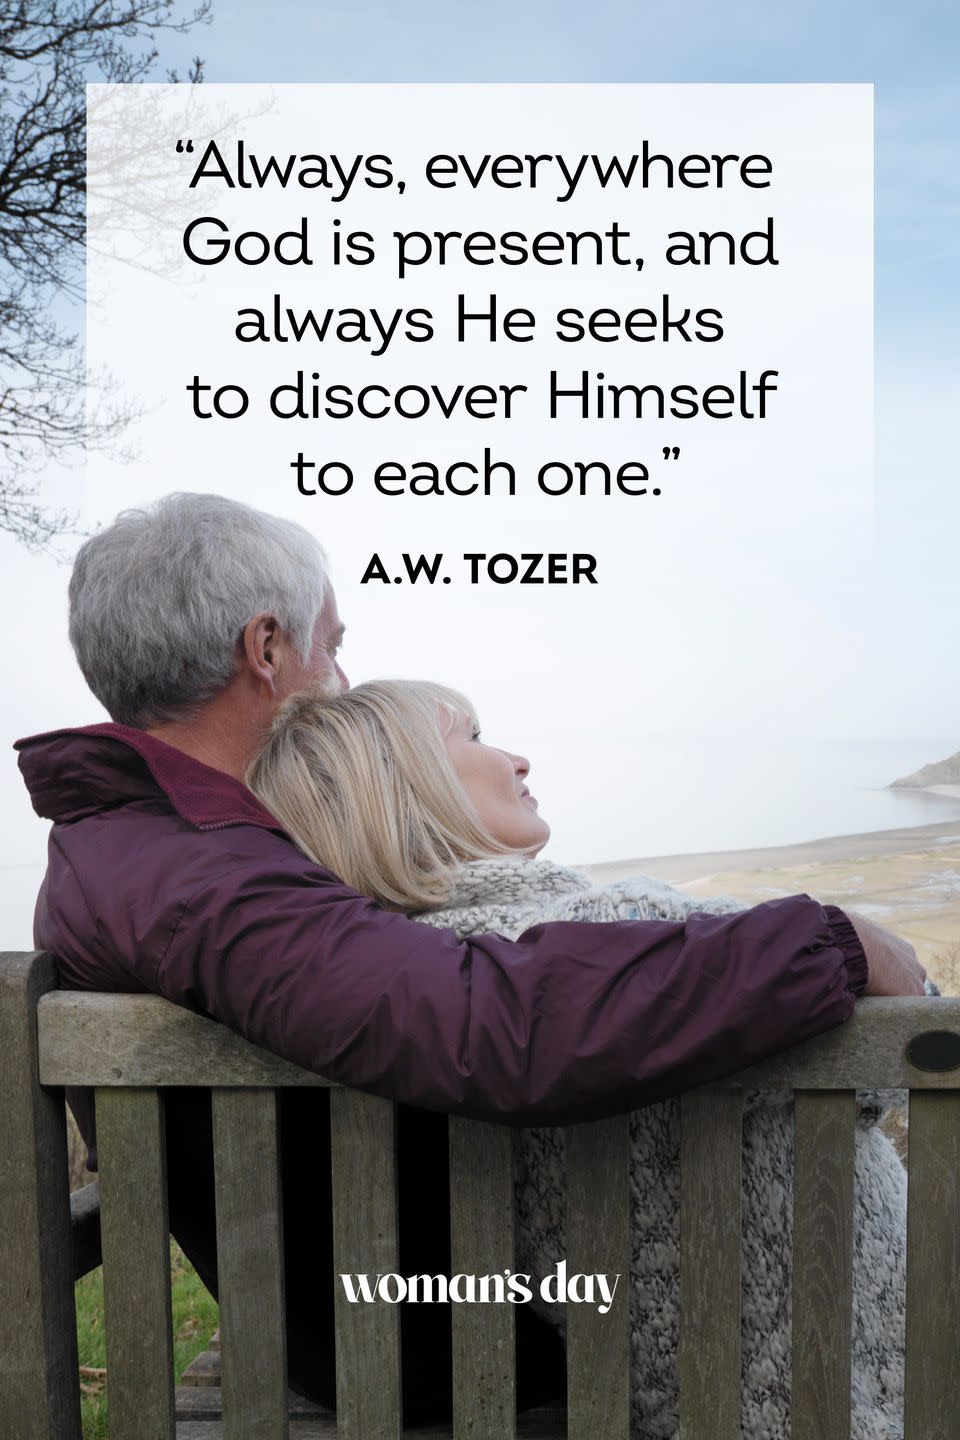 <p>"Always, everywhere God is present, and always He seeks to discover Himself to each one."</p>